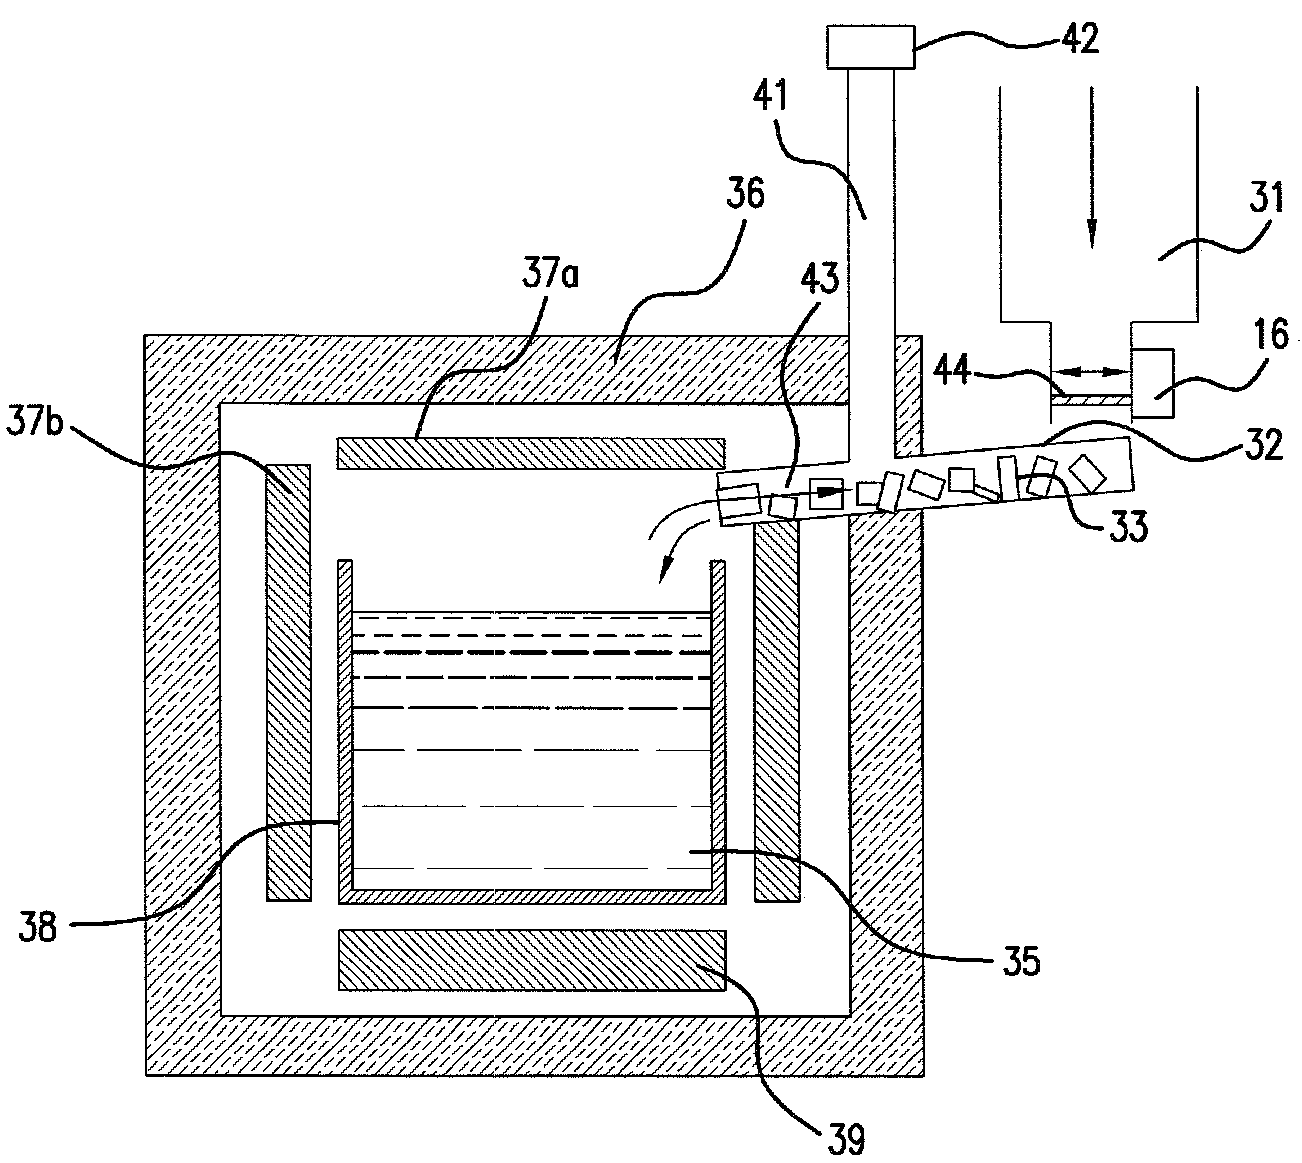 Method for producing a monocrystalline or polycrystalline semiconductore material